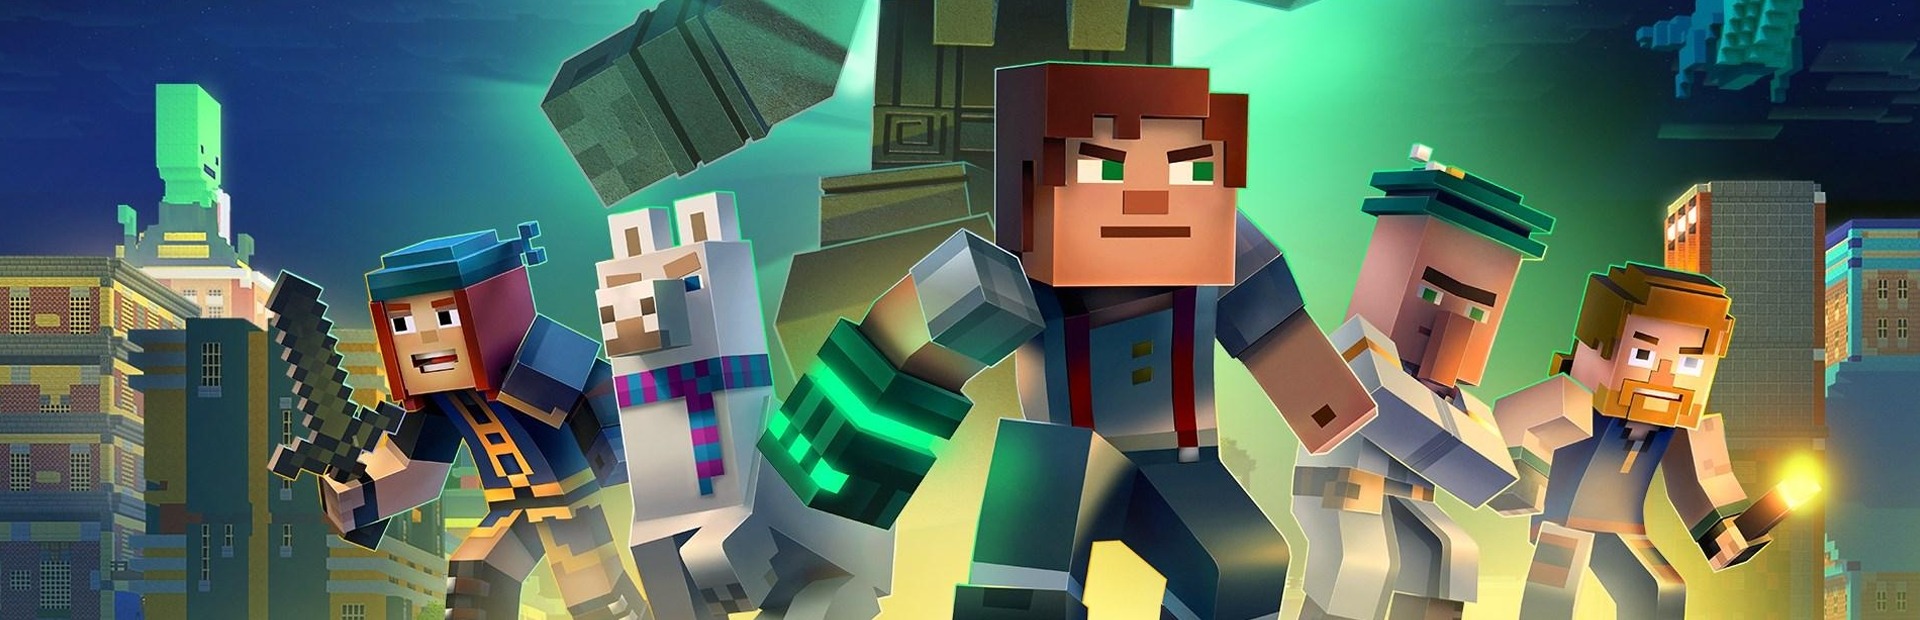 Minecraft: Story Mode The Complete Adventure